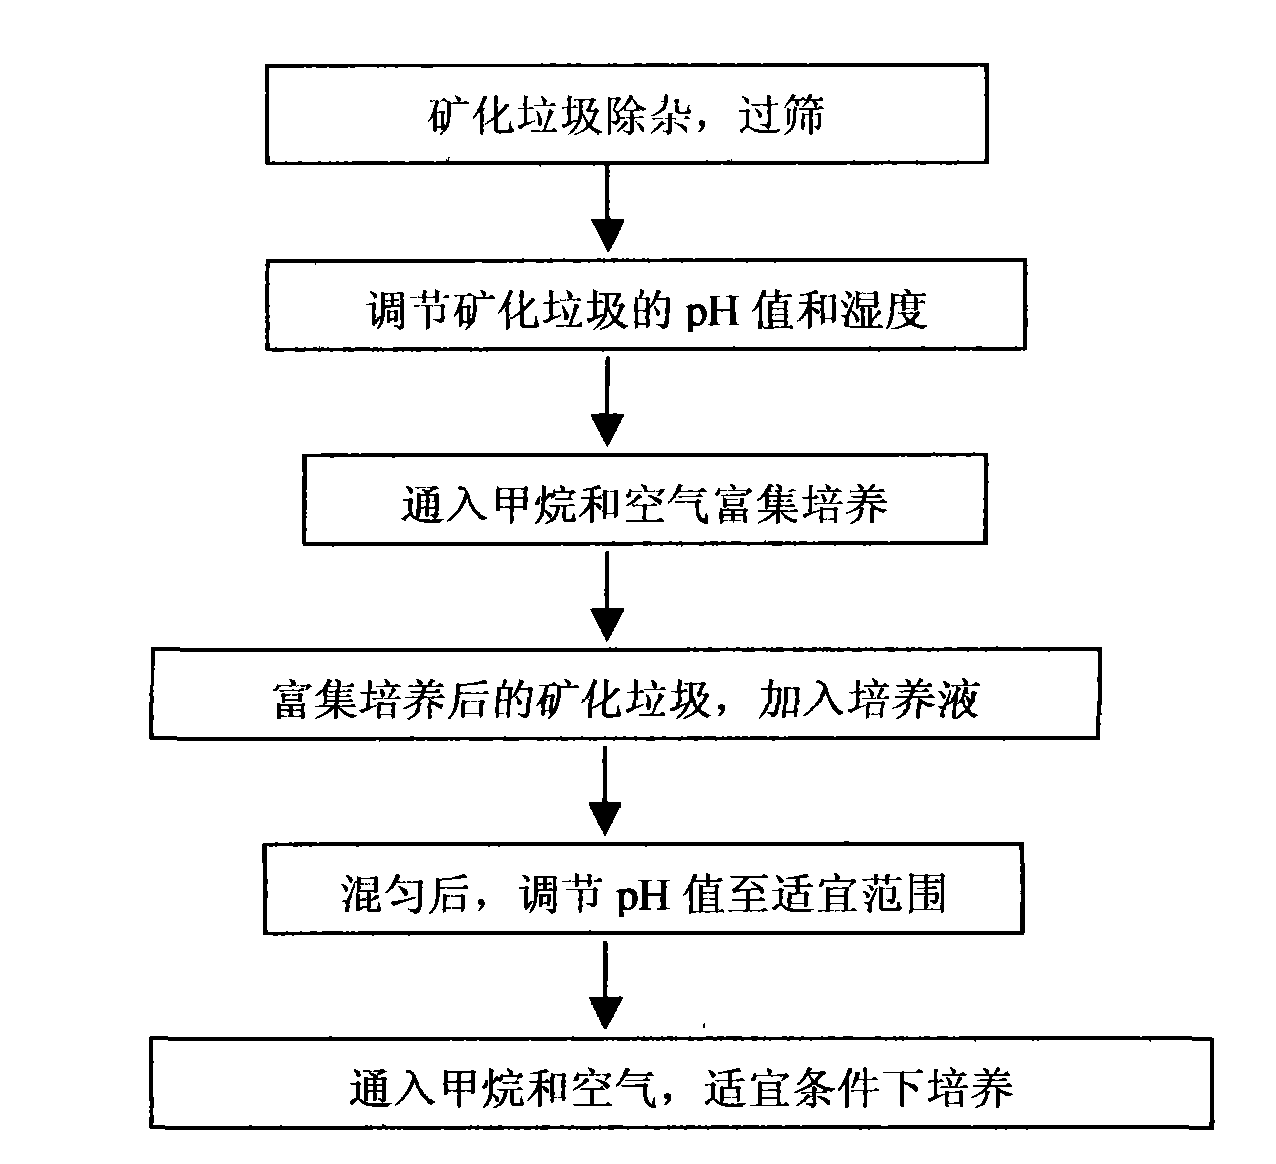 Process for producing methyl hydride oxidized bacteria agent